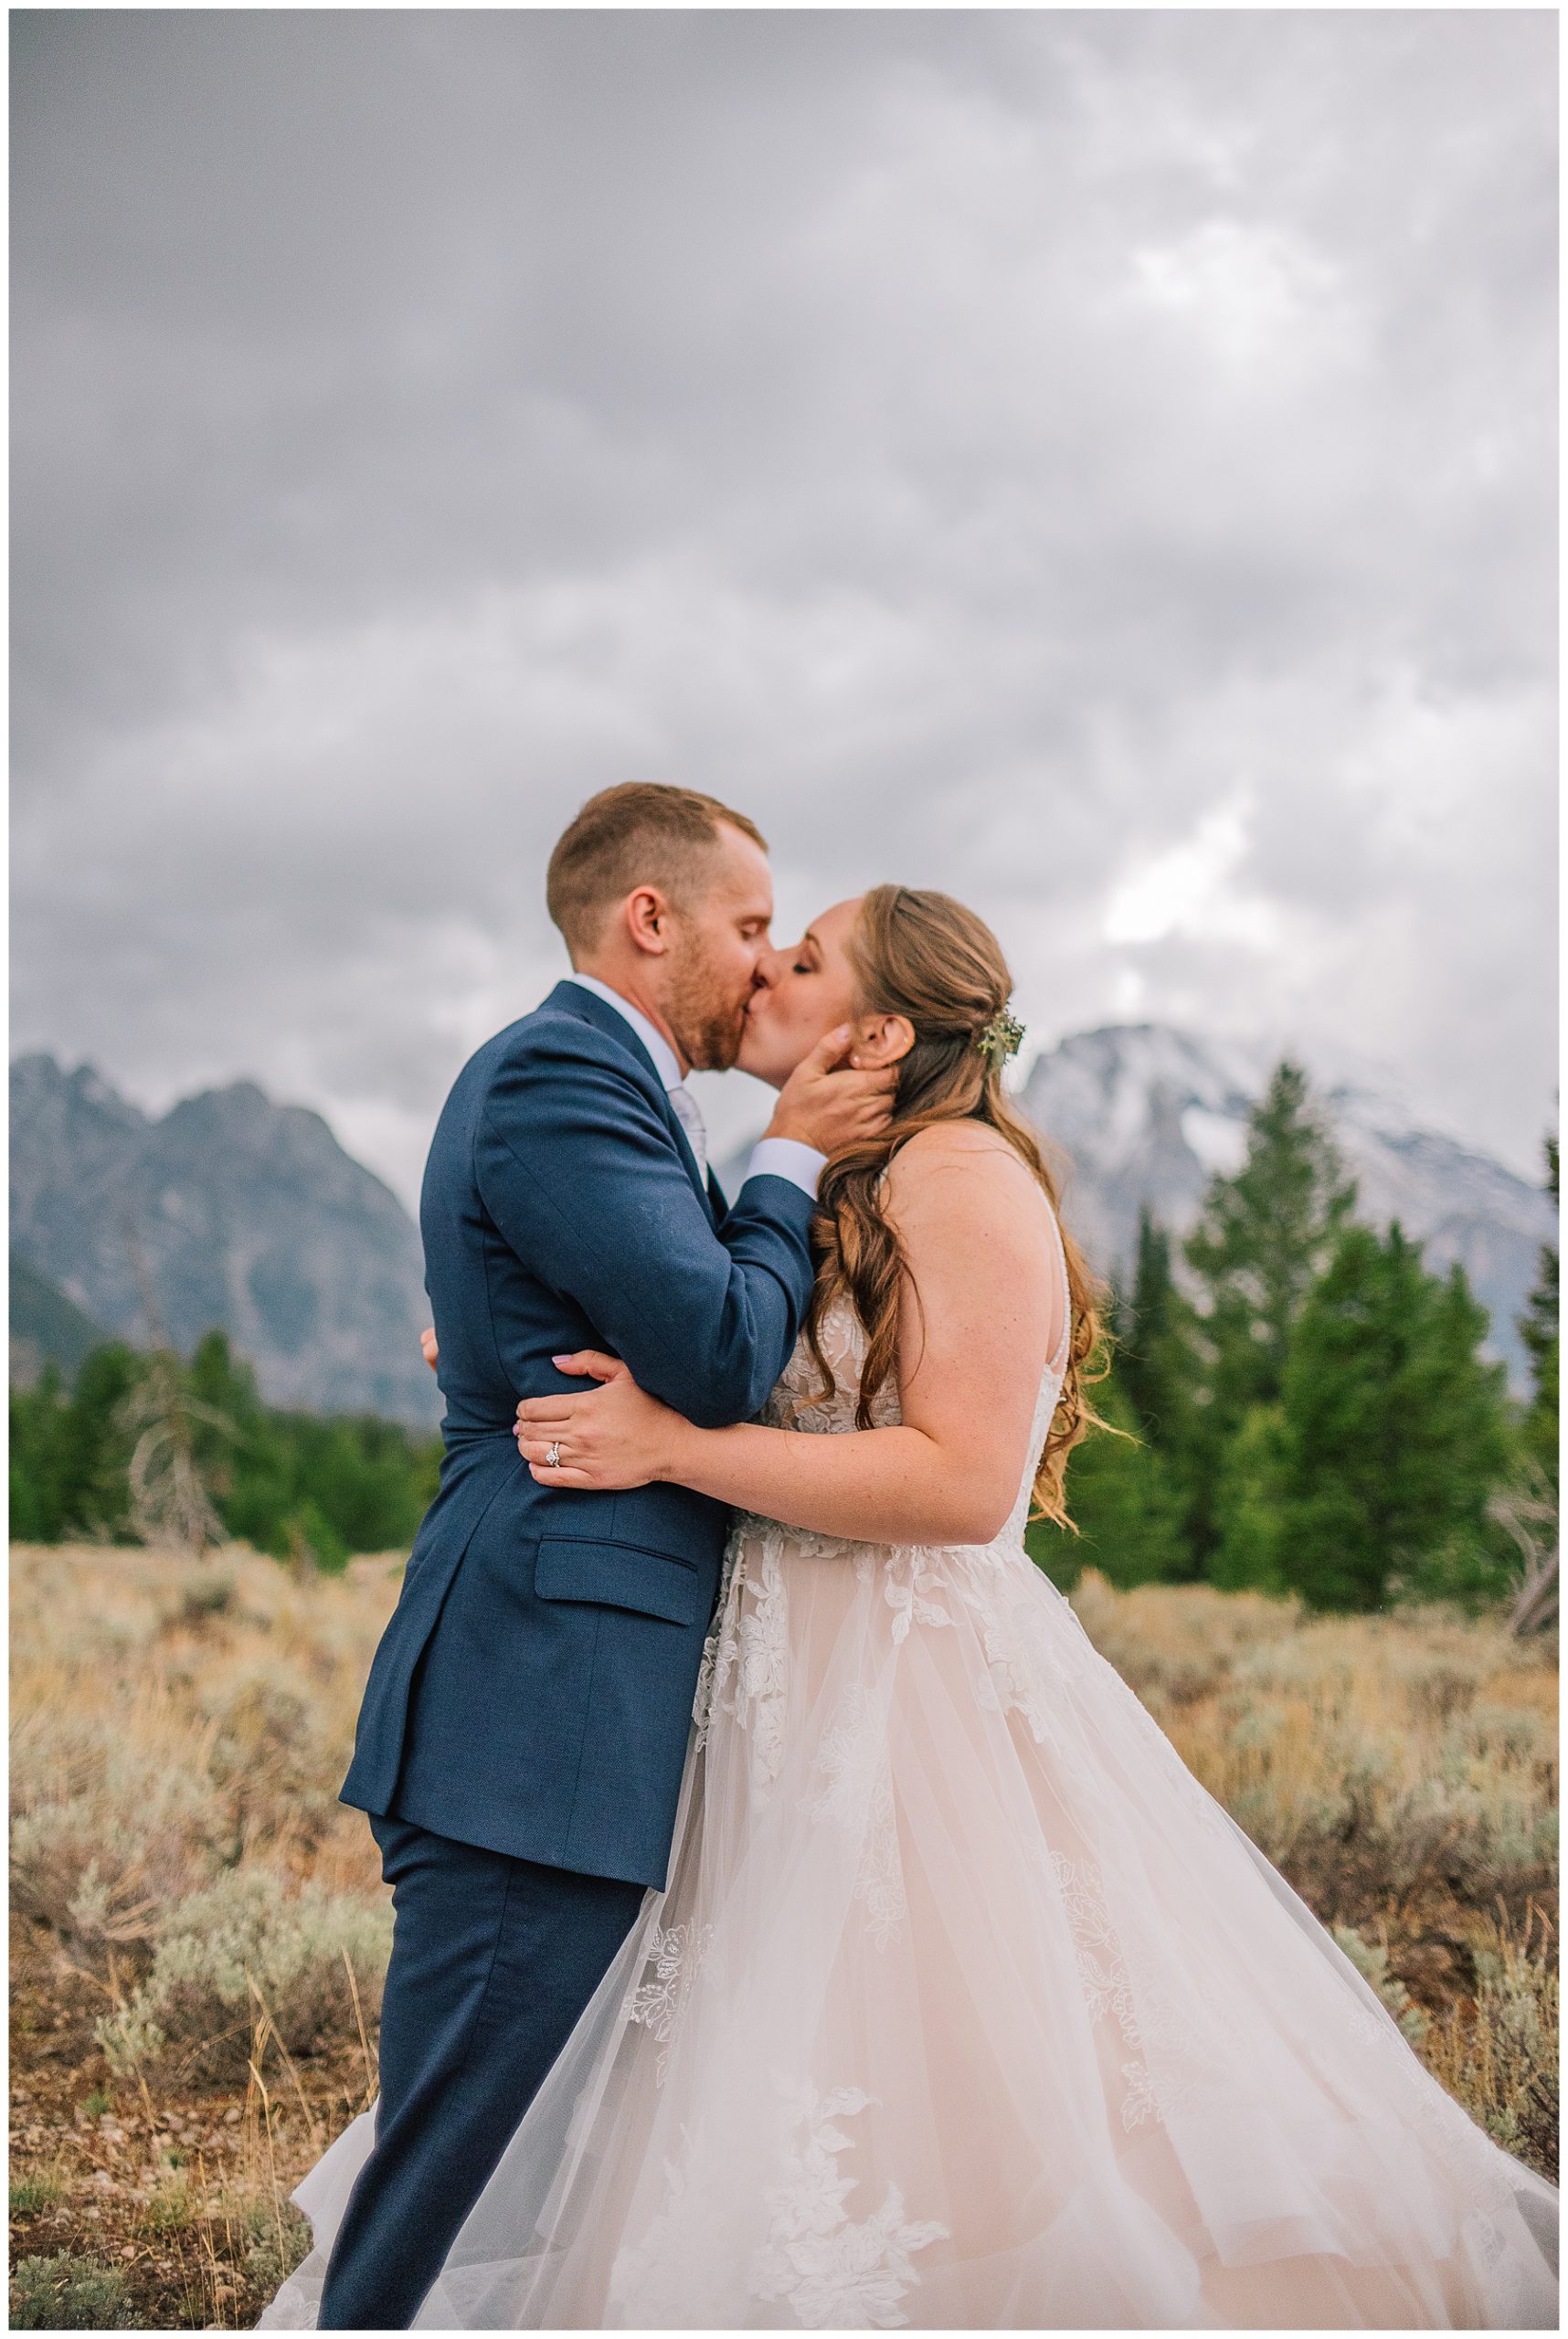 Sacramento wedding photographer captures national park wedding with bride and groom kissing and holding each other in front of a mountain range on a cloudy day